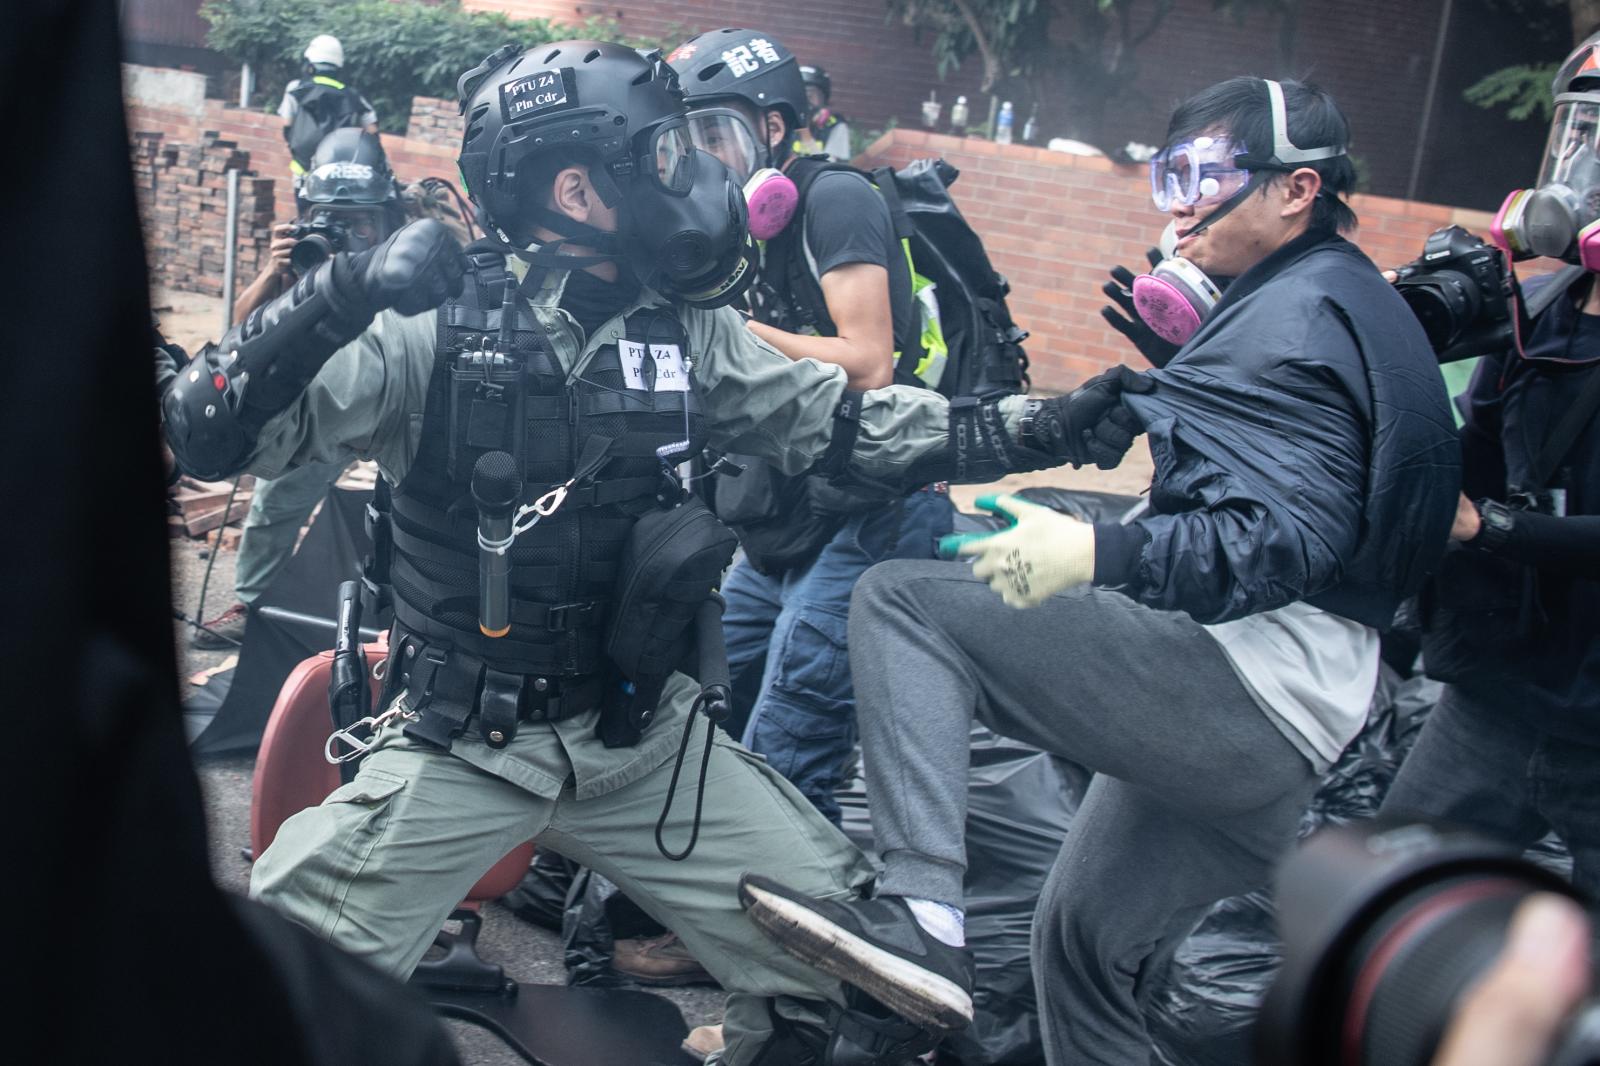 HONG KONG, CHINA - NOVEMBER 18: Police arrest anti-government protesters at Hong Kong Polytechnic University on November 18, 2019 in Hong Kong, China. Anti-government protesters organized a general strike since Monday as demonstrations in Hong Kong stretched into its sixth month with demands for an independent inquiry into police brutality, the retraction of the word &quot;riot&quot; to describe the rallies, and genuine universal suffrage. (Photo by Laurel Chor/Getty Images)